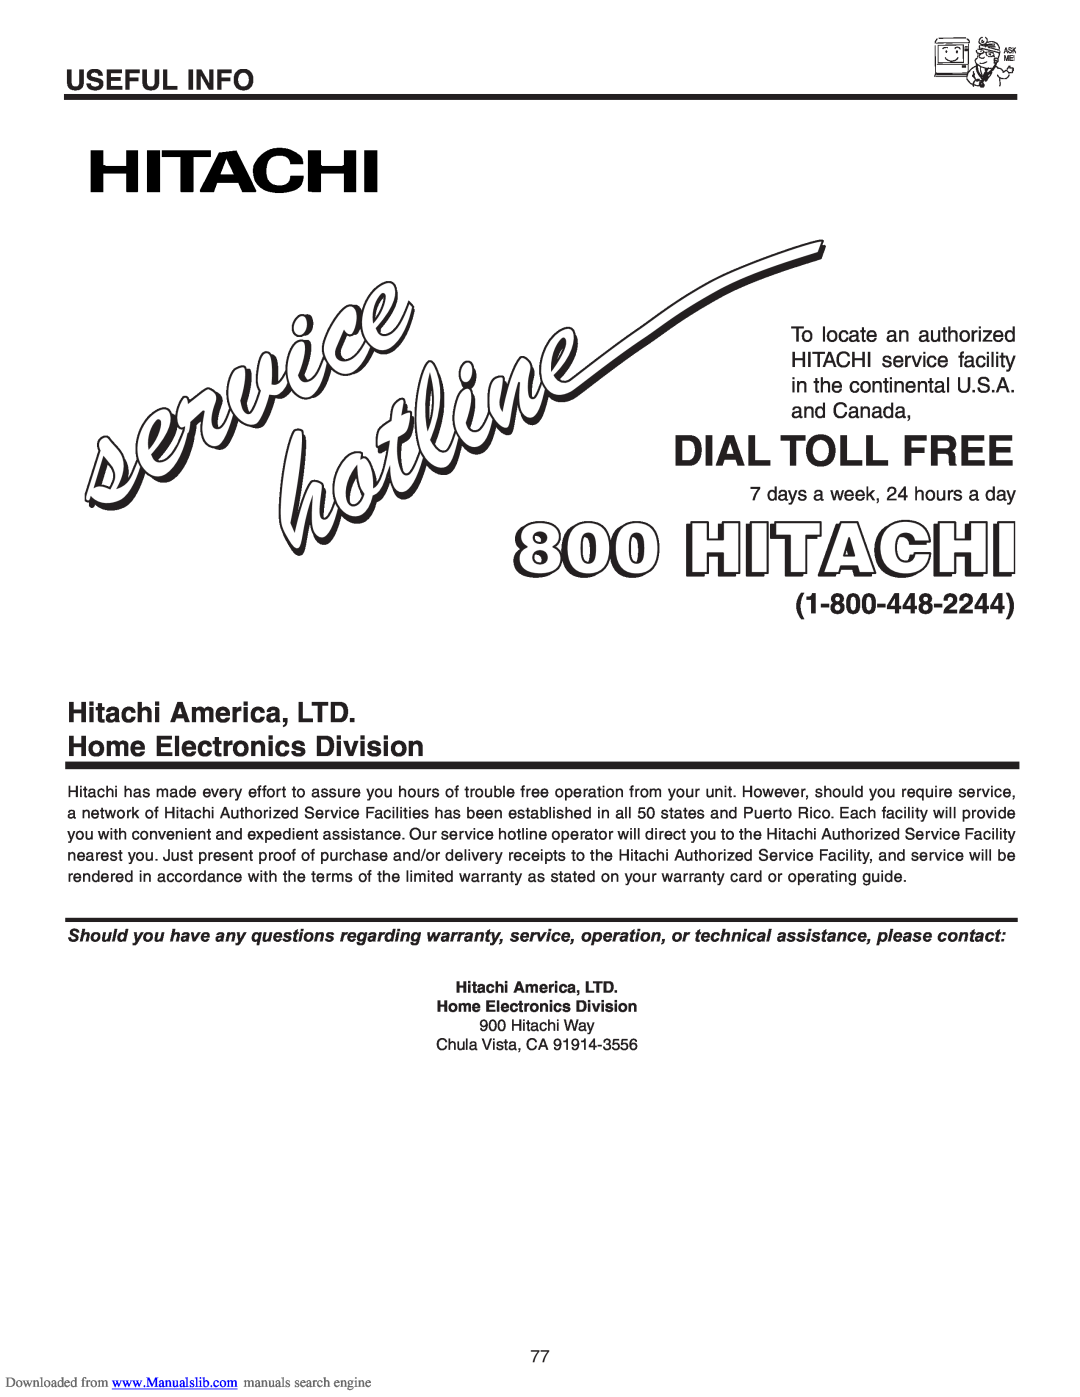 Hitachi 70VS810, 50VS810A, 60VS810 Home Electronics Division, days a week, 24 hours a day, Dial Toll Free, Useful Info 